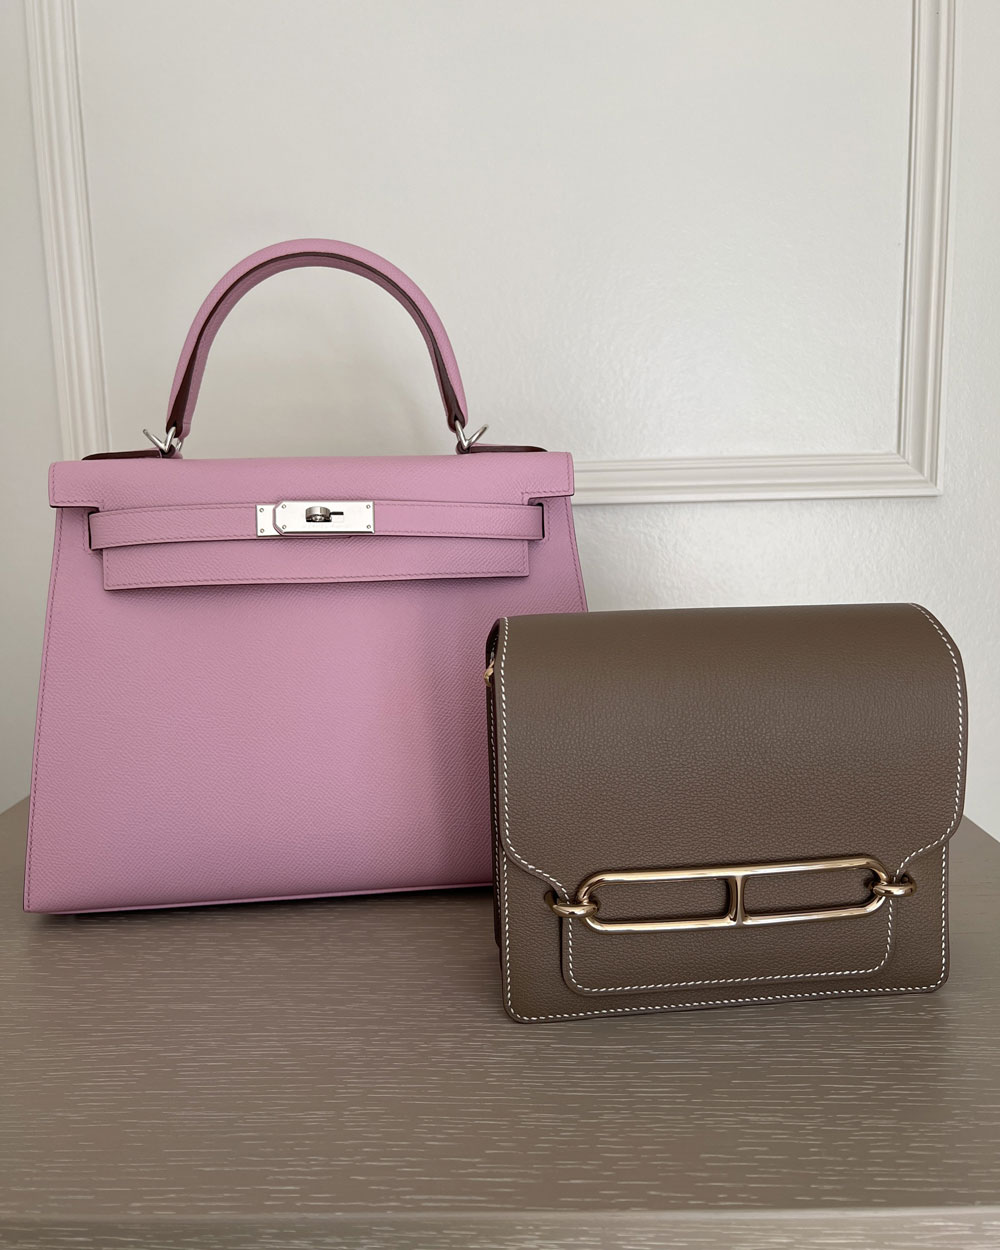 I Can't Stop Thinking About Buying a Polène Paris Bag - PurseBlog